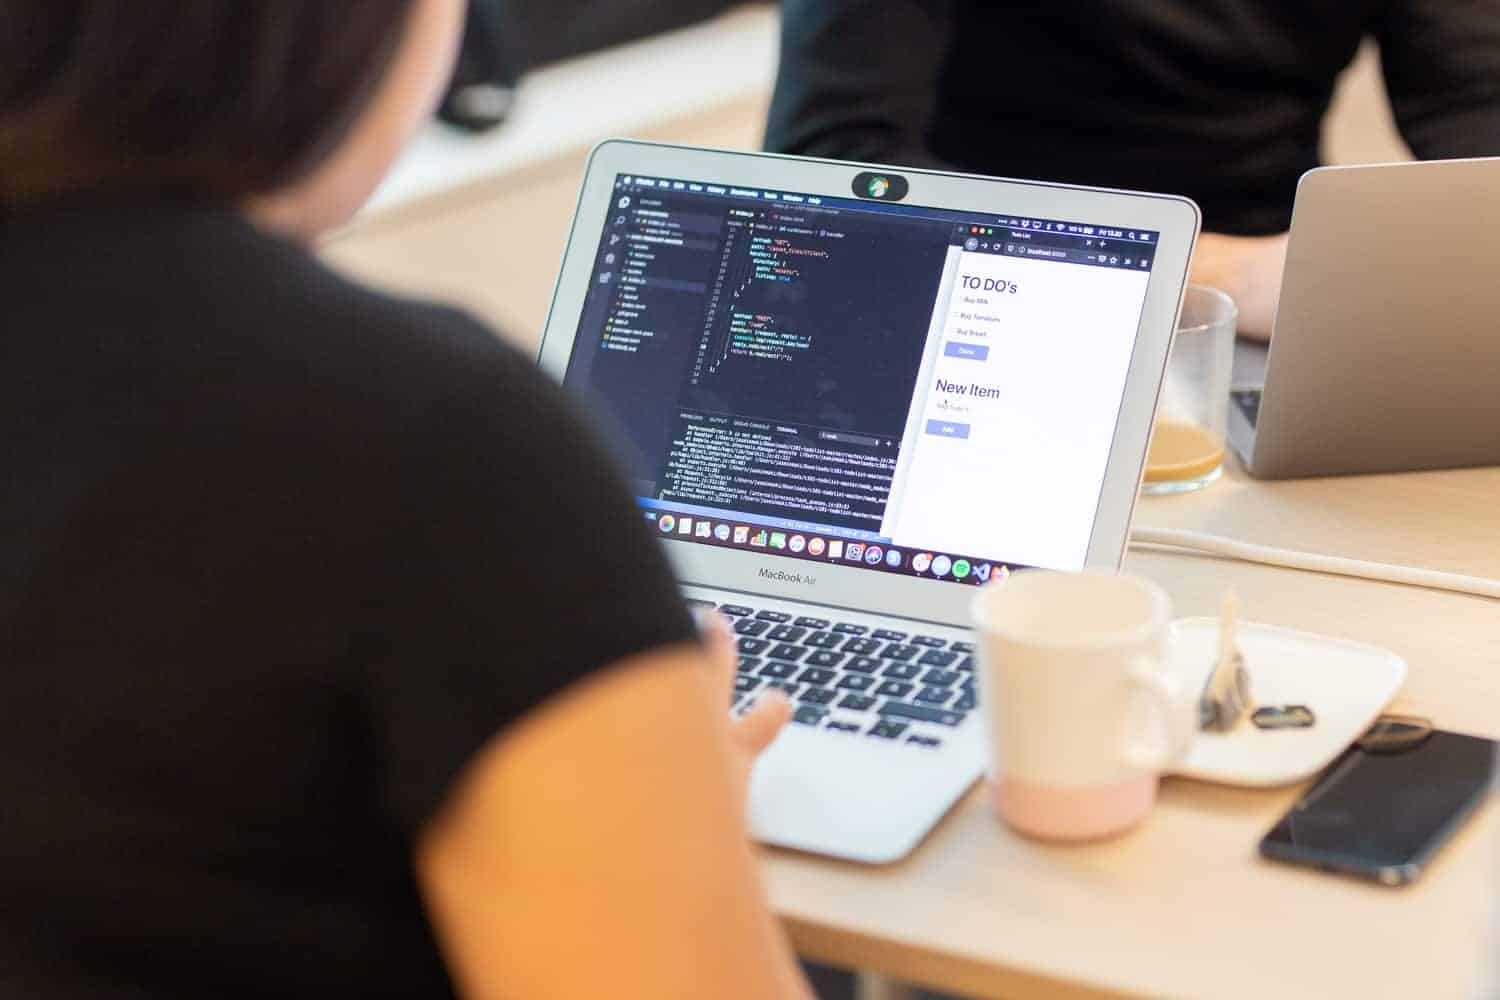 Trainee programs for Junior Developers in Finland